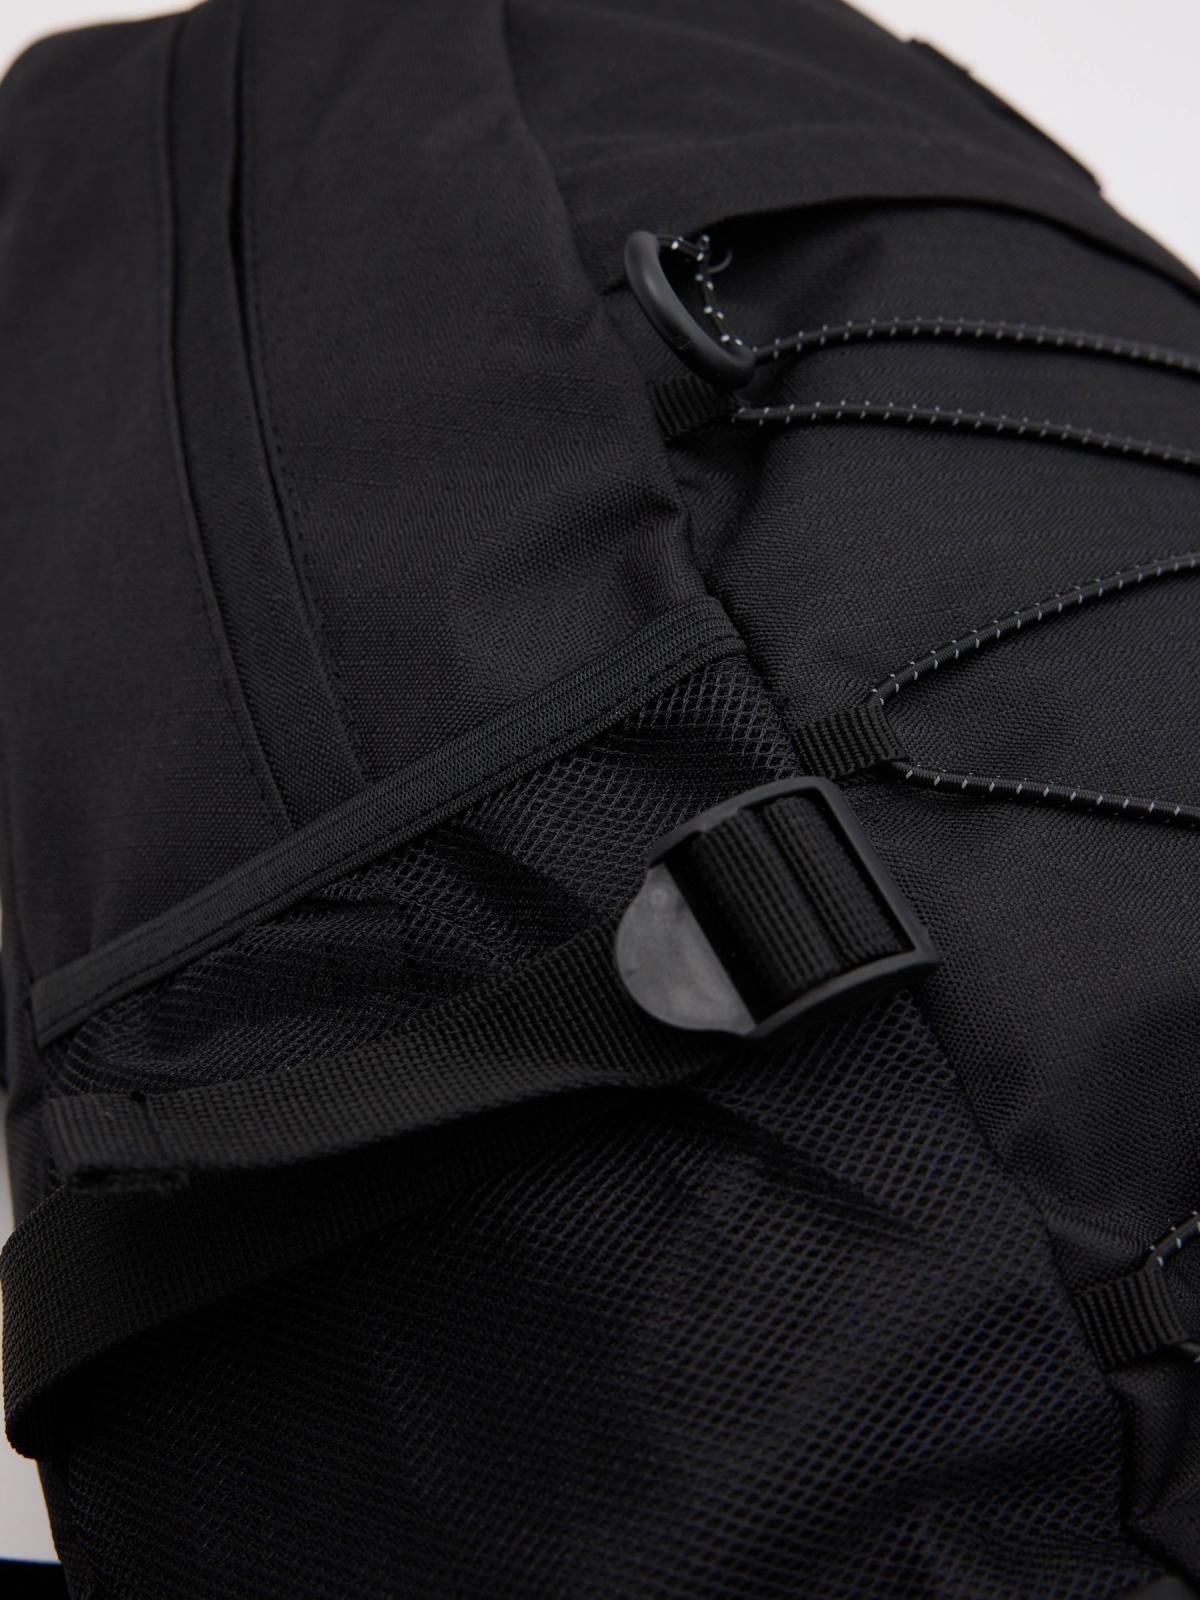 Polyester sports backpack detail view